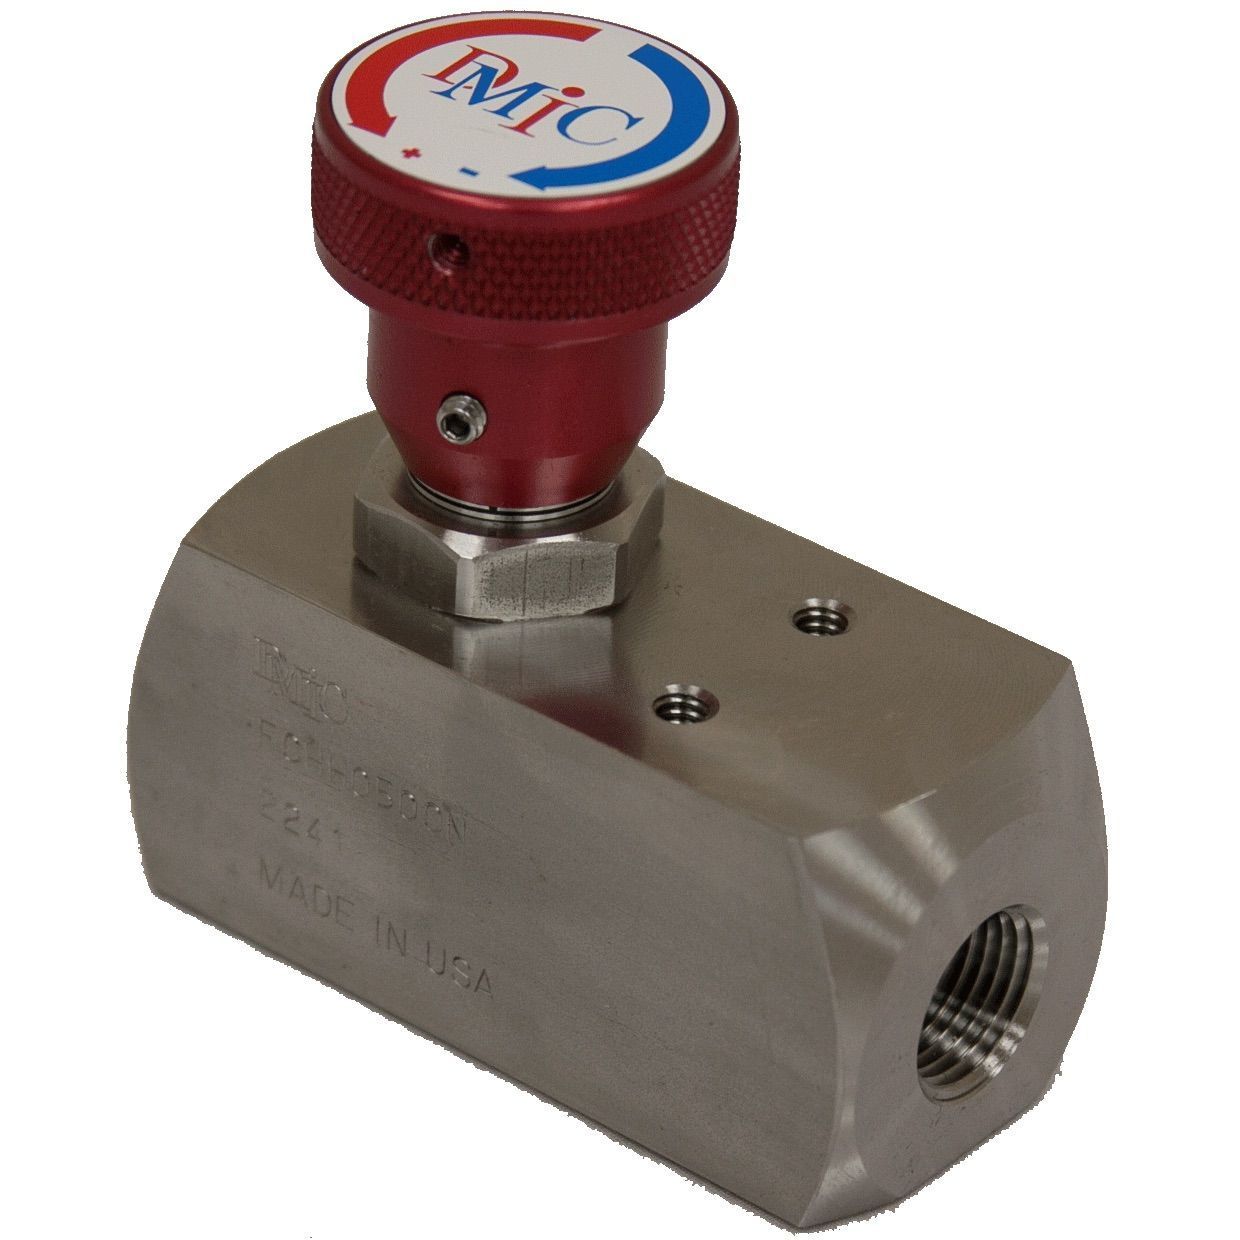 FCHH-1250N-2221 : DMIC Flow Control, Unidirectional, with Integrated Check, 1.25" NPT, 316SS, 10000psi